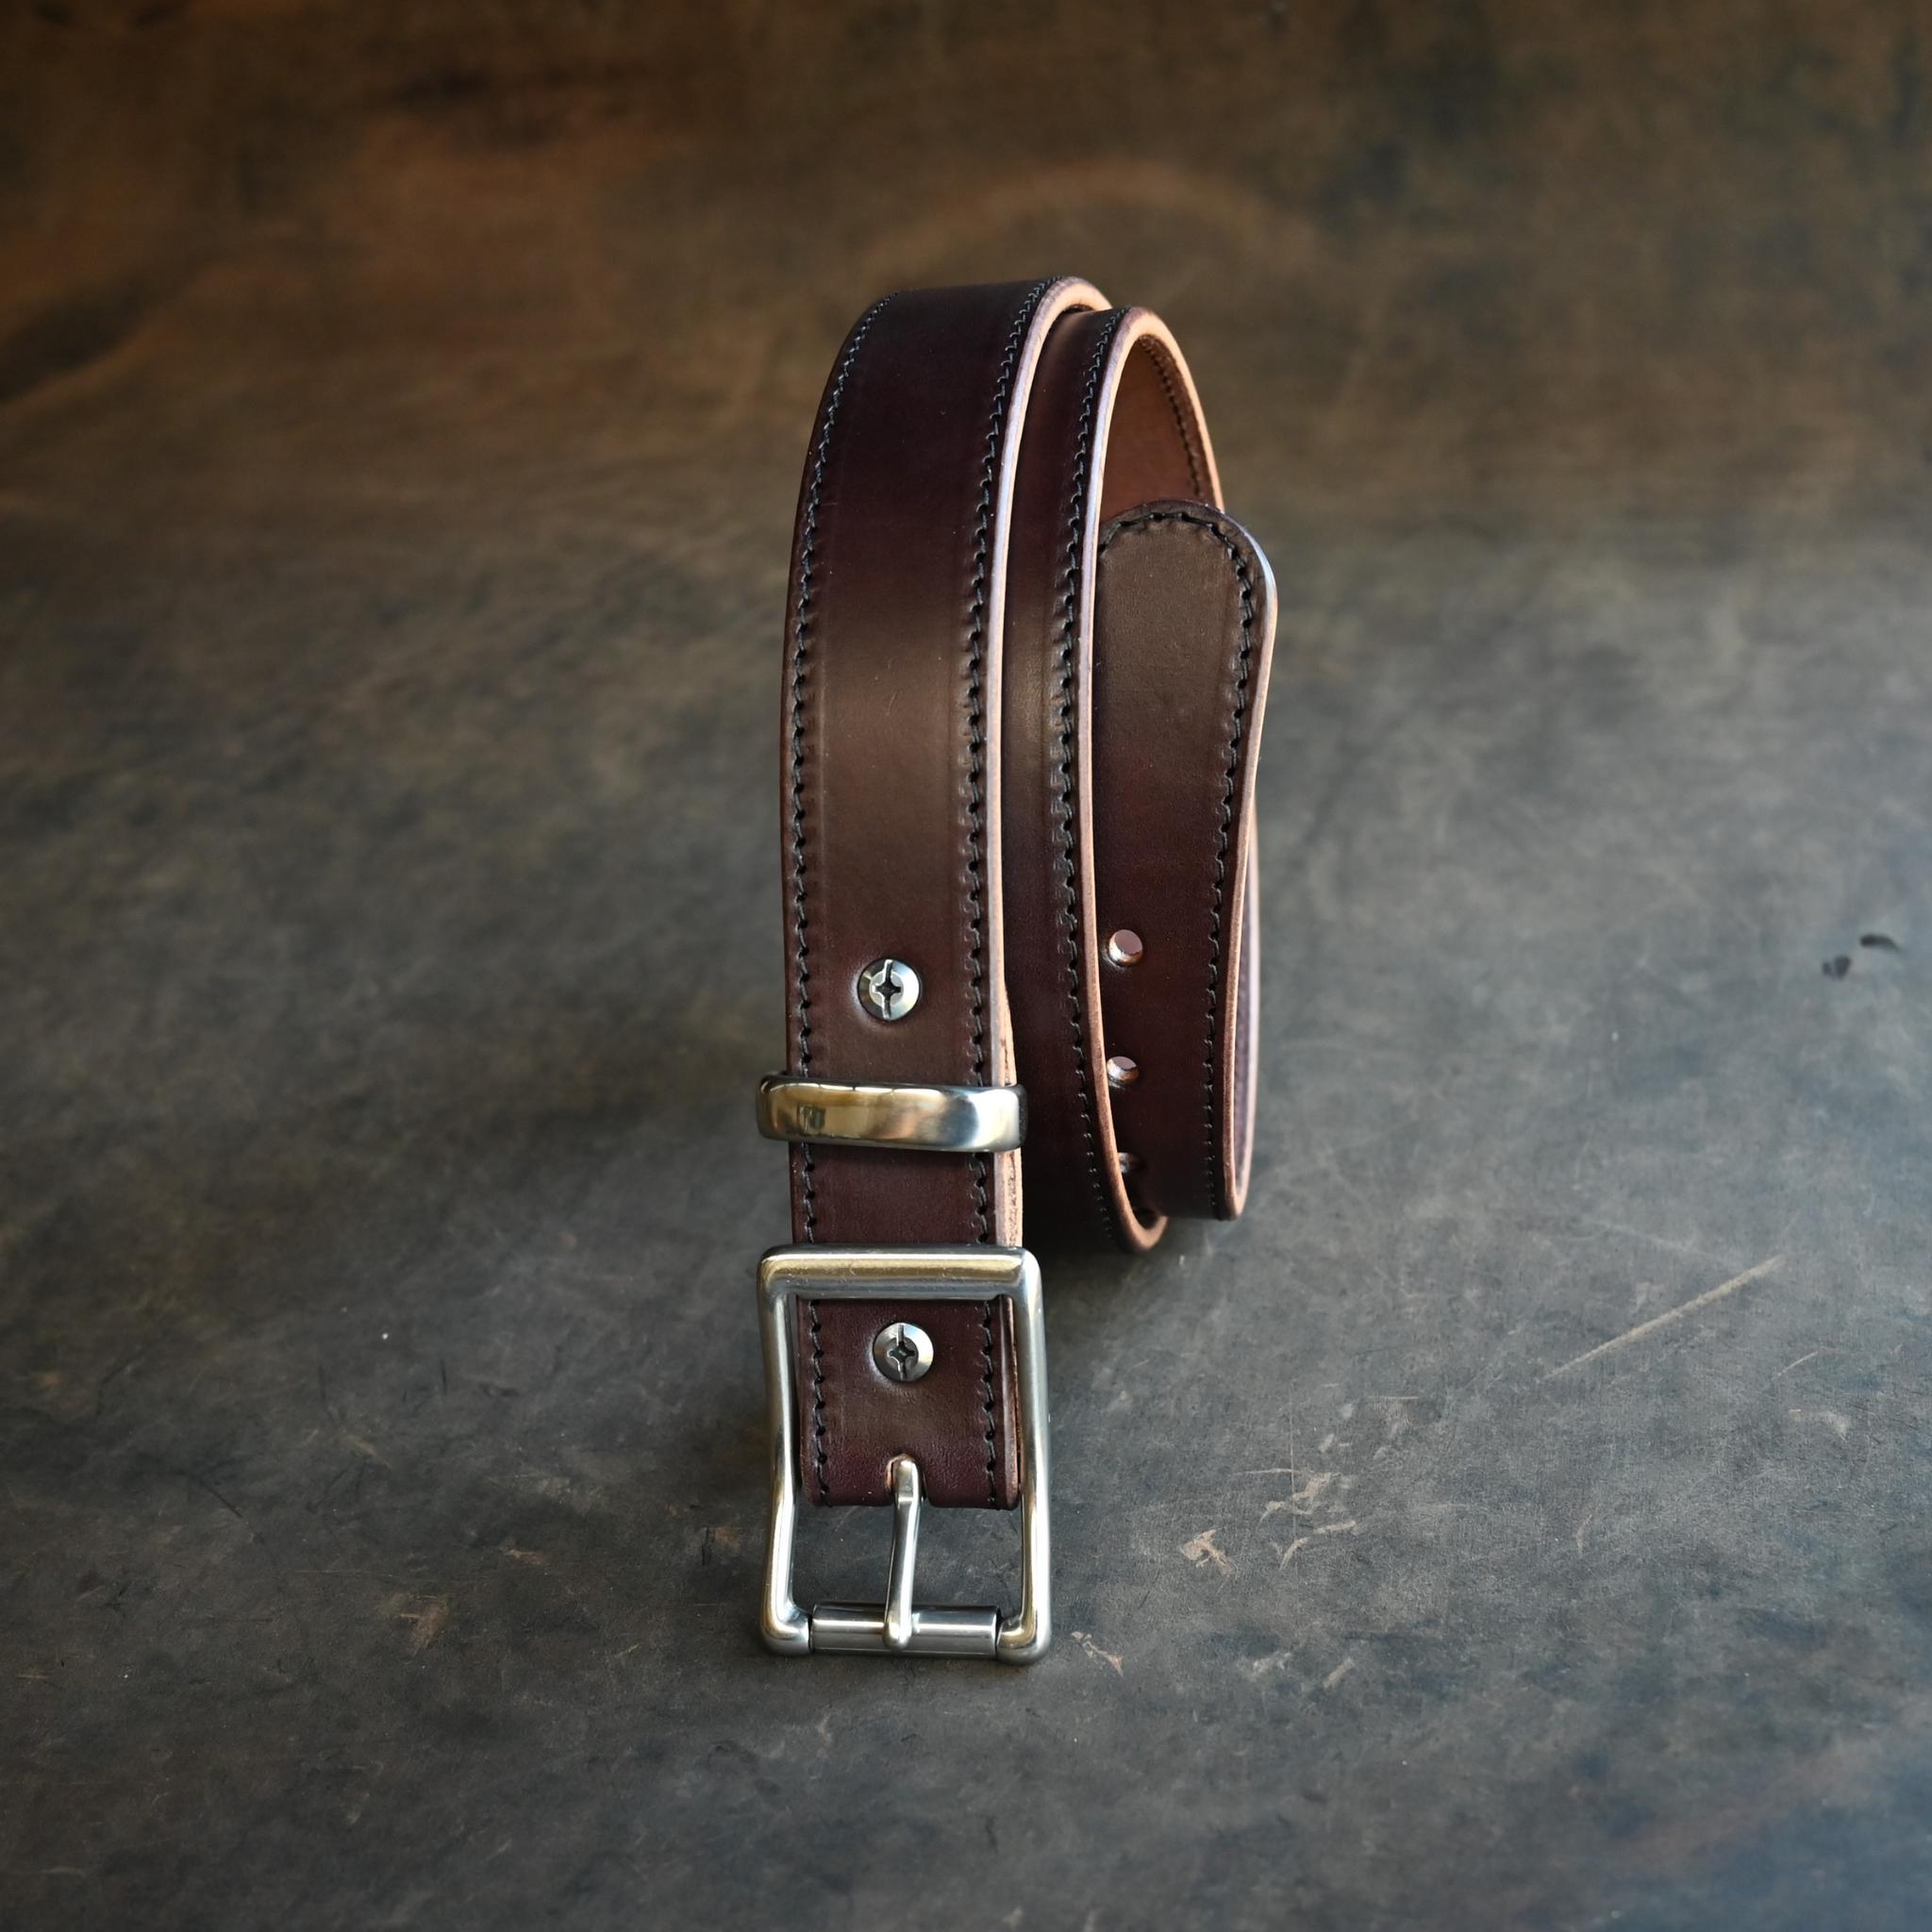 RMK Stitched Leather Belts